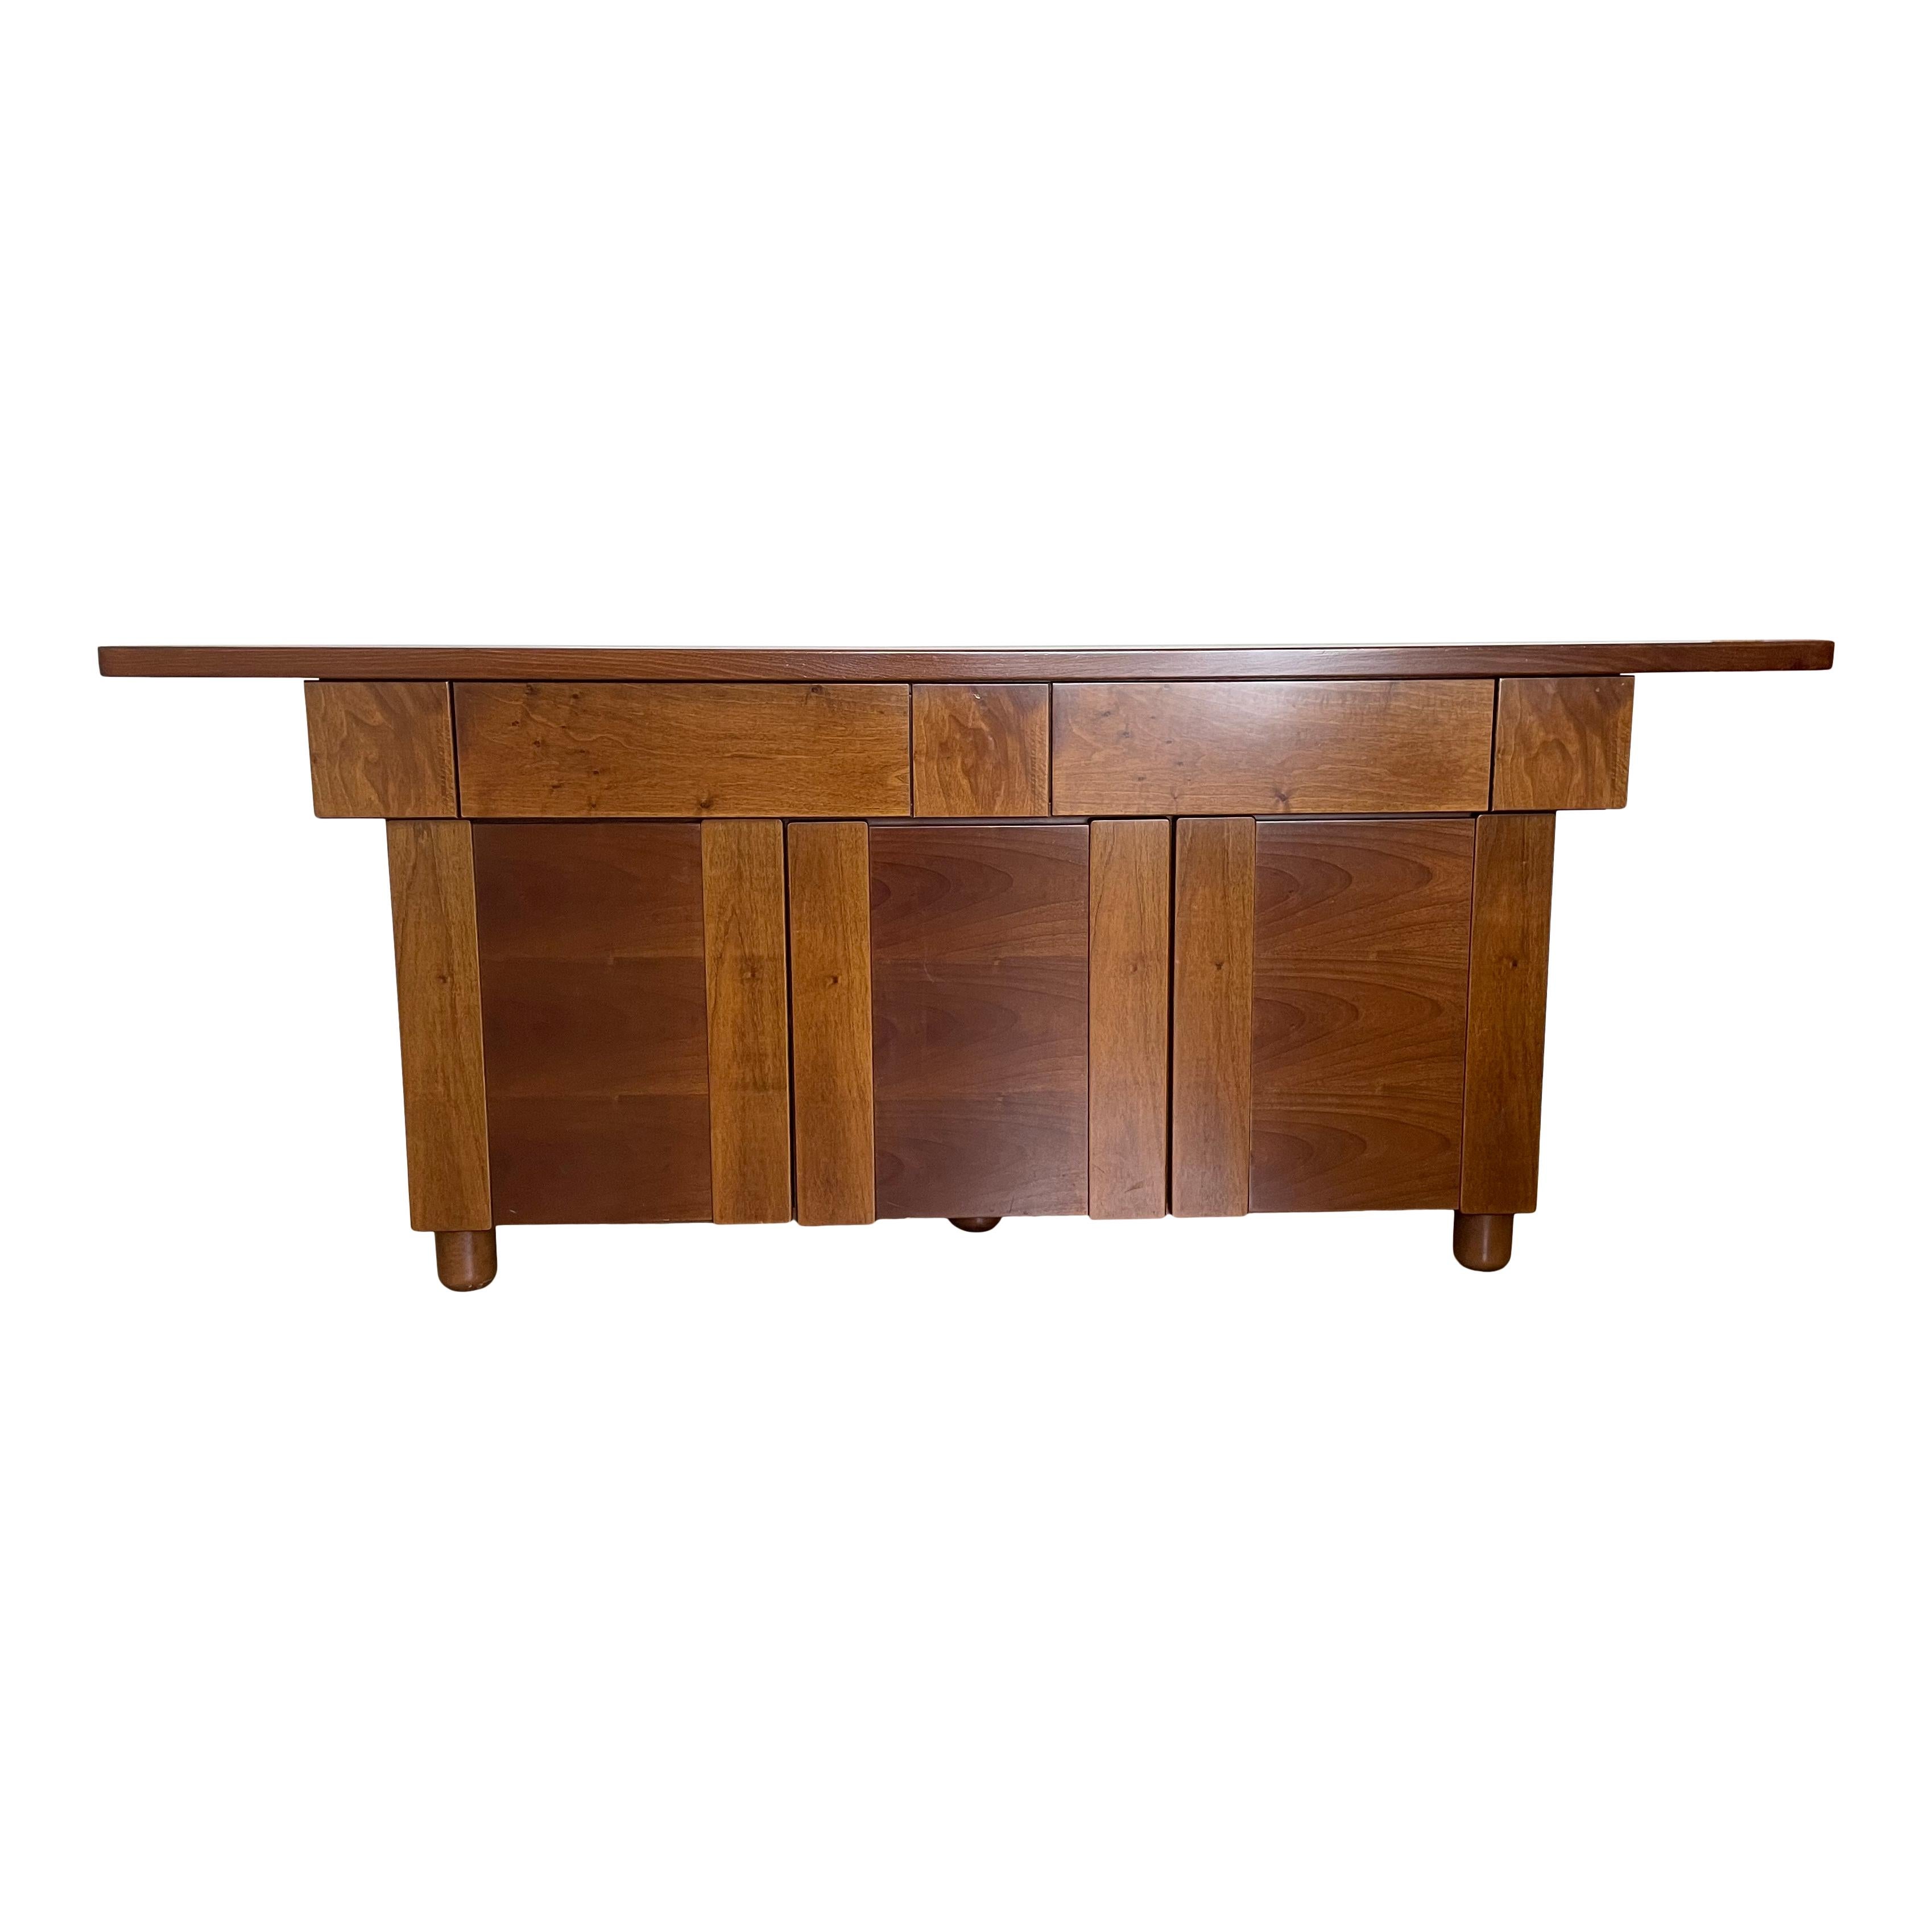 Sideboard made by Poltronova in 1970.
The technical office of the brand designed it in the style of the Torbecchia series by Giovanni Michelucci.
Made of walnut.

Excellent vintage condition.

Established in 1957 by Sergio Camilli, Poltronova